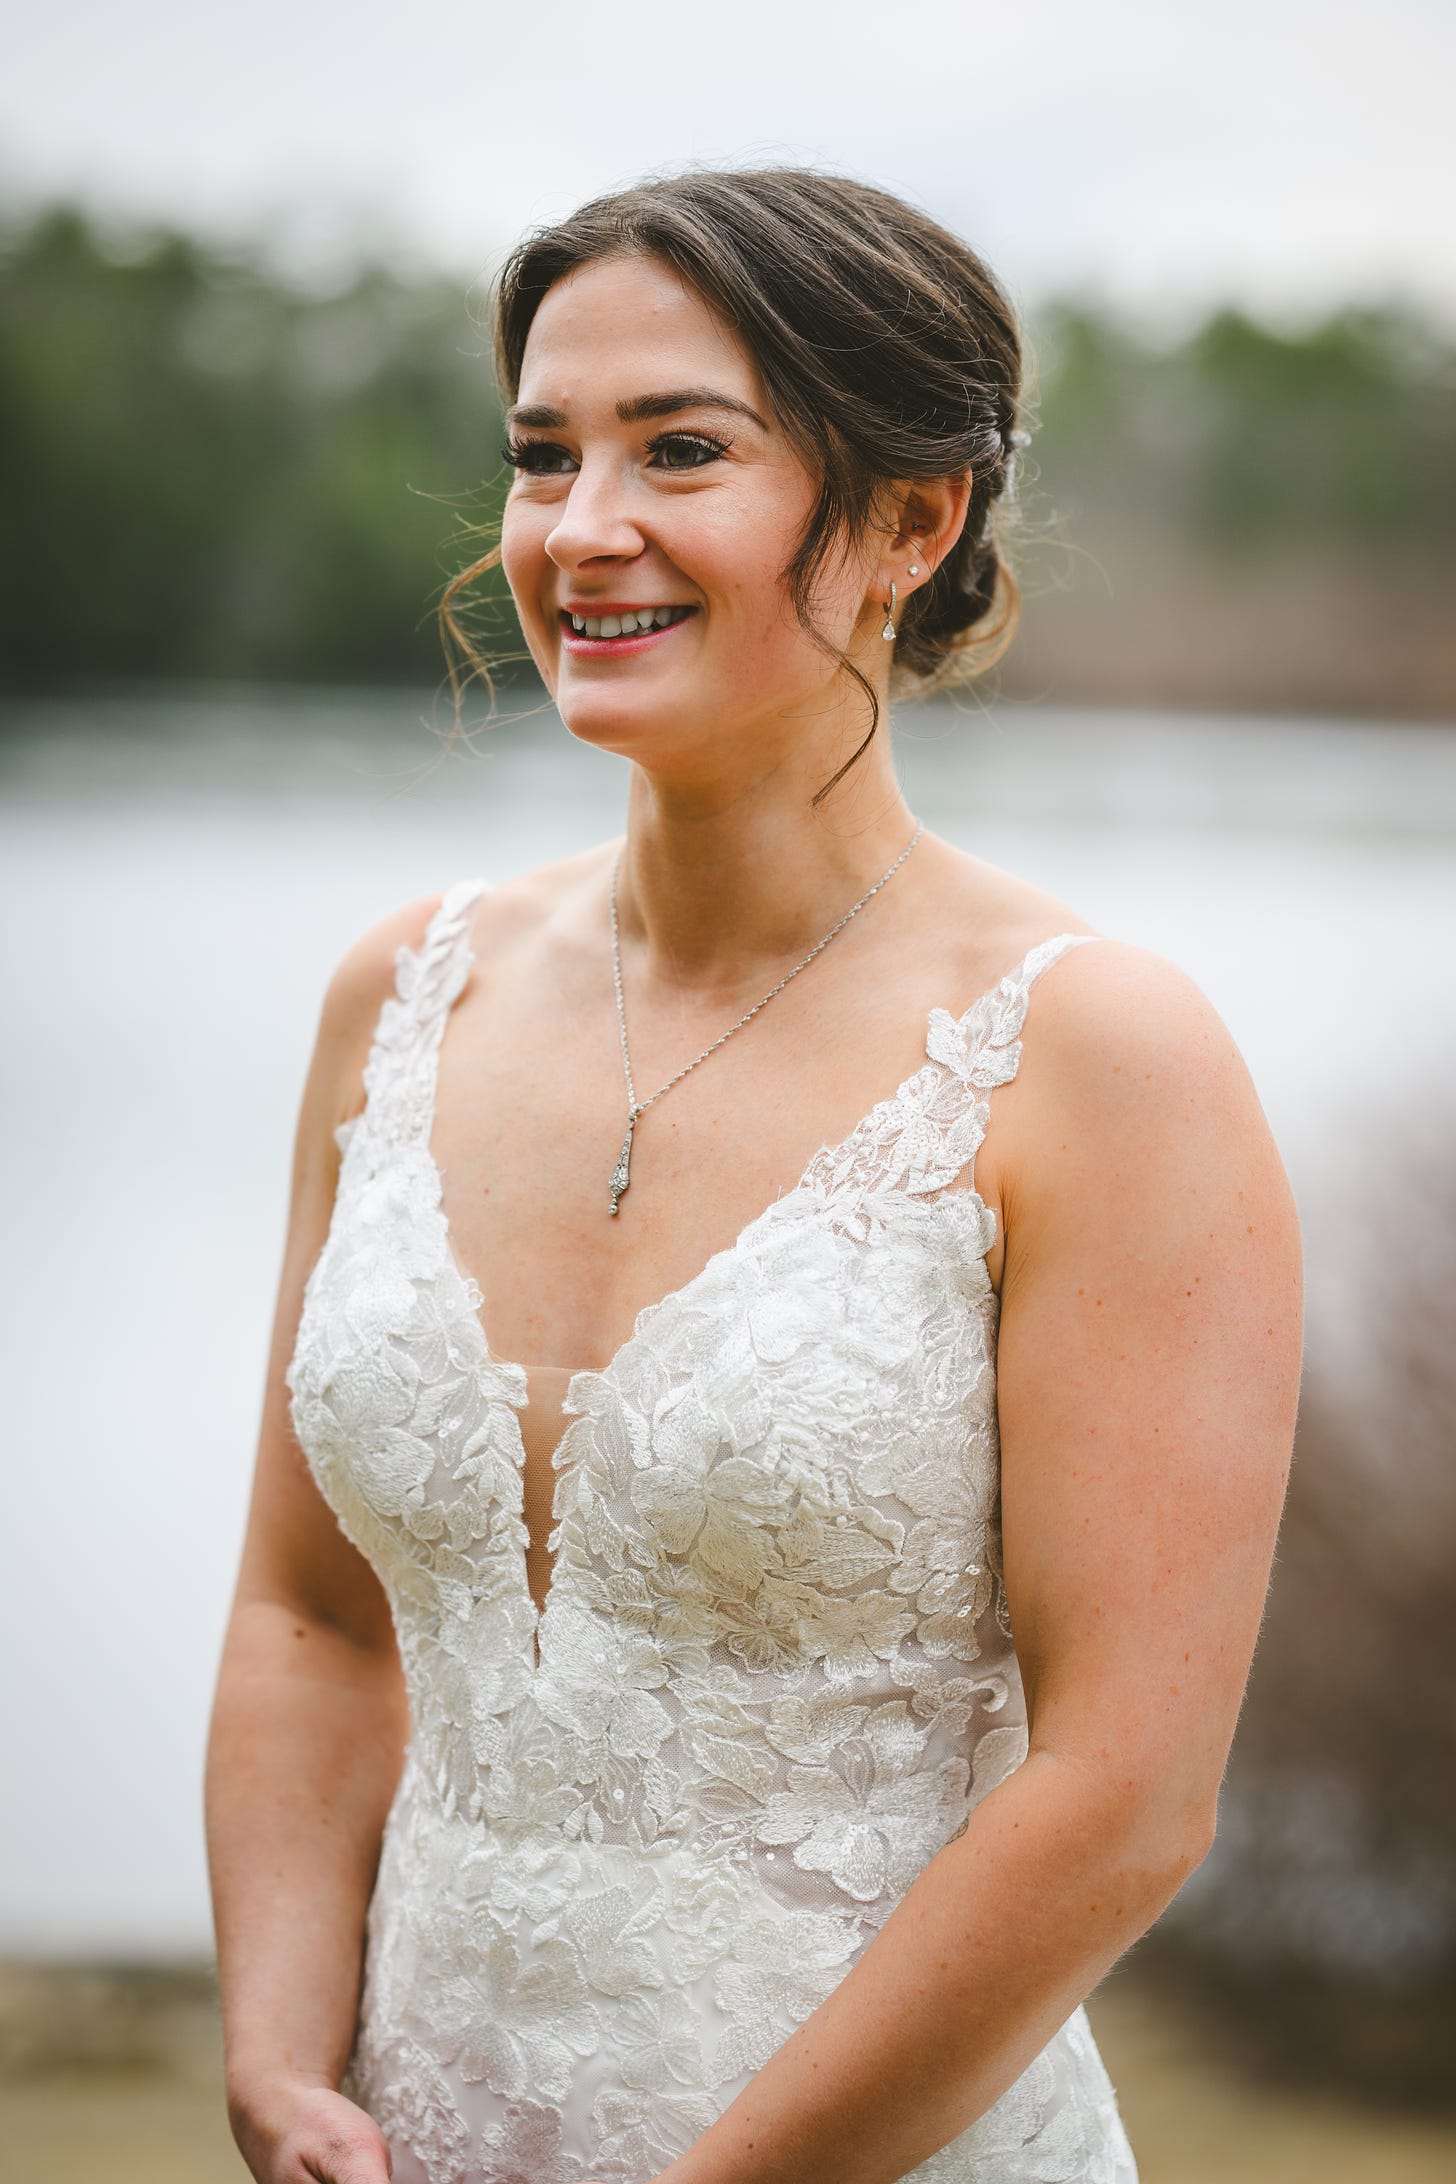 A bride in her wedding dress standing in front of a lake